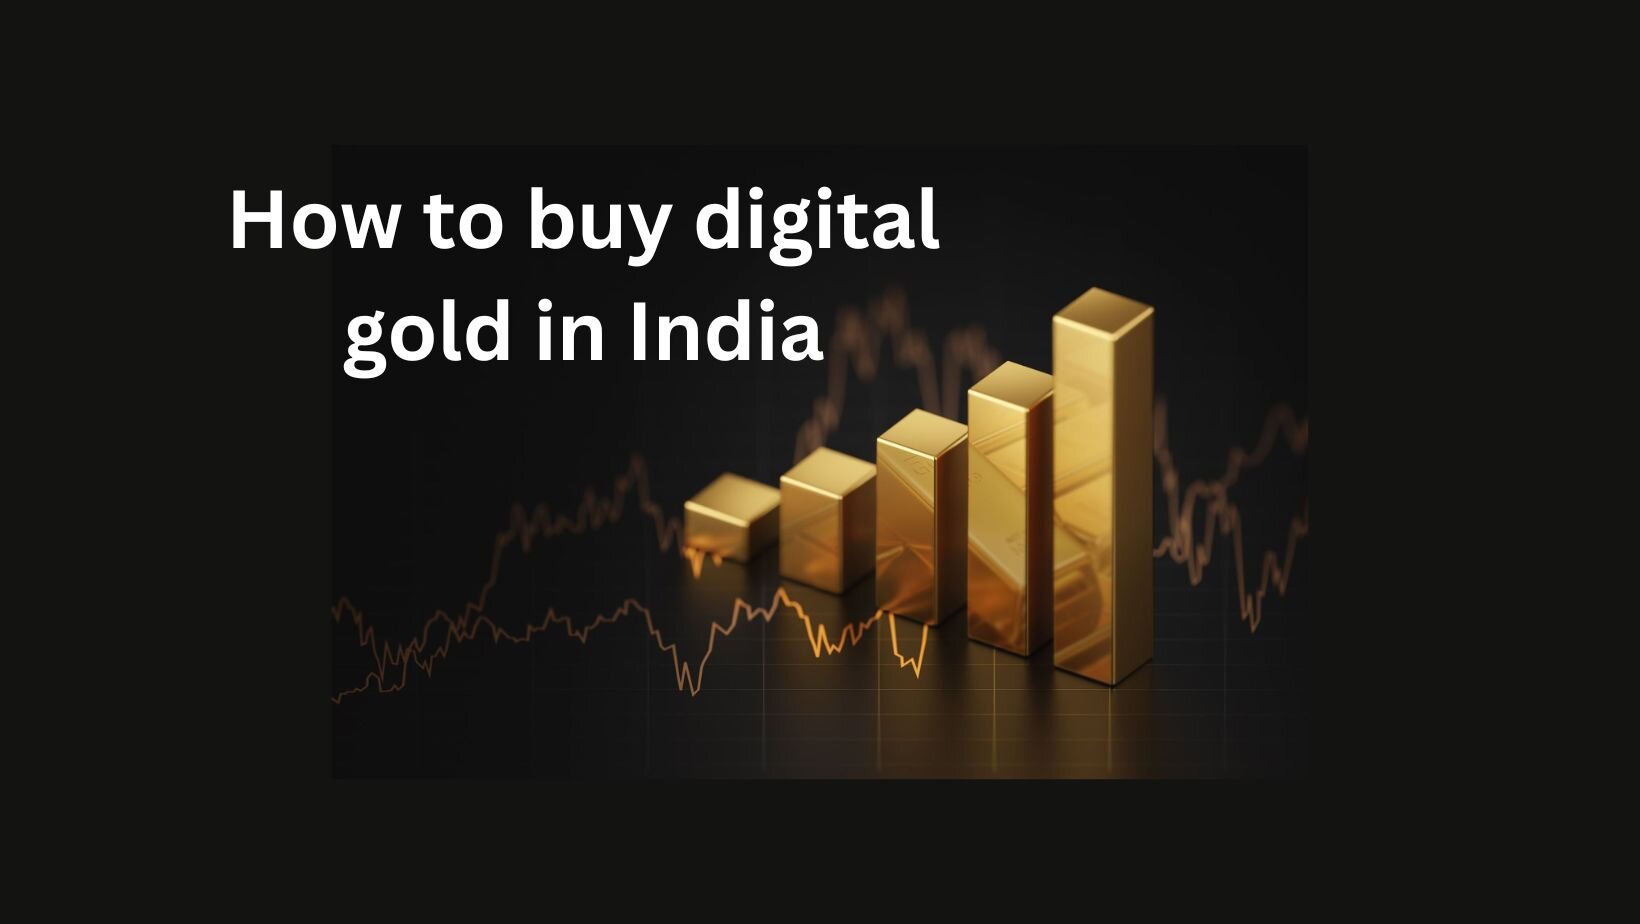 How to buy digital gold in India